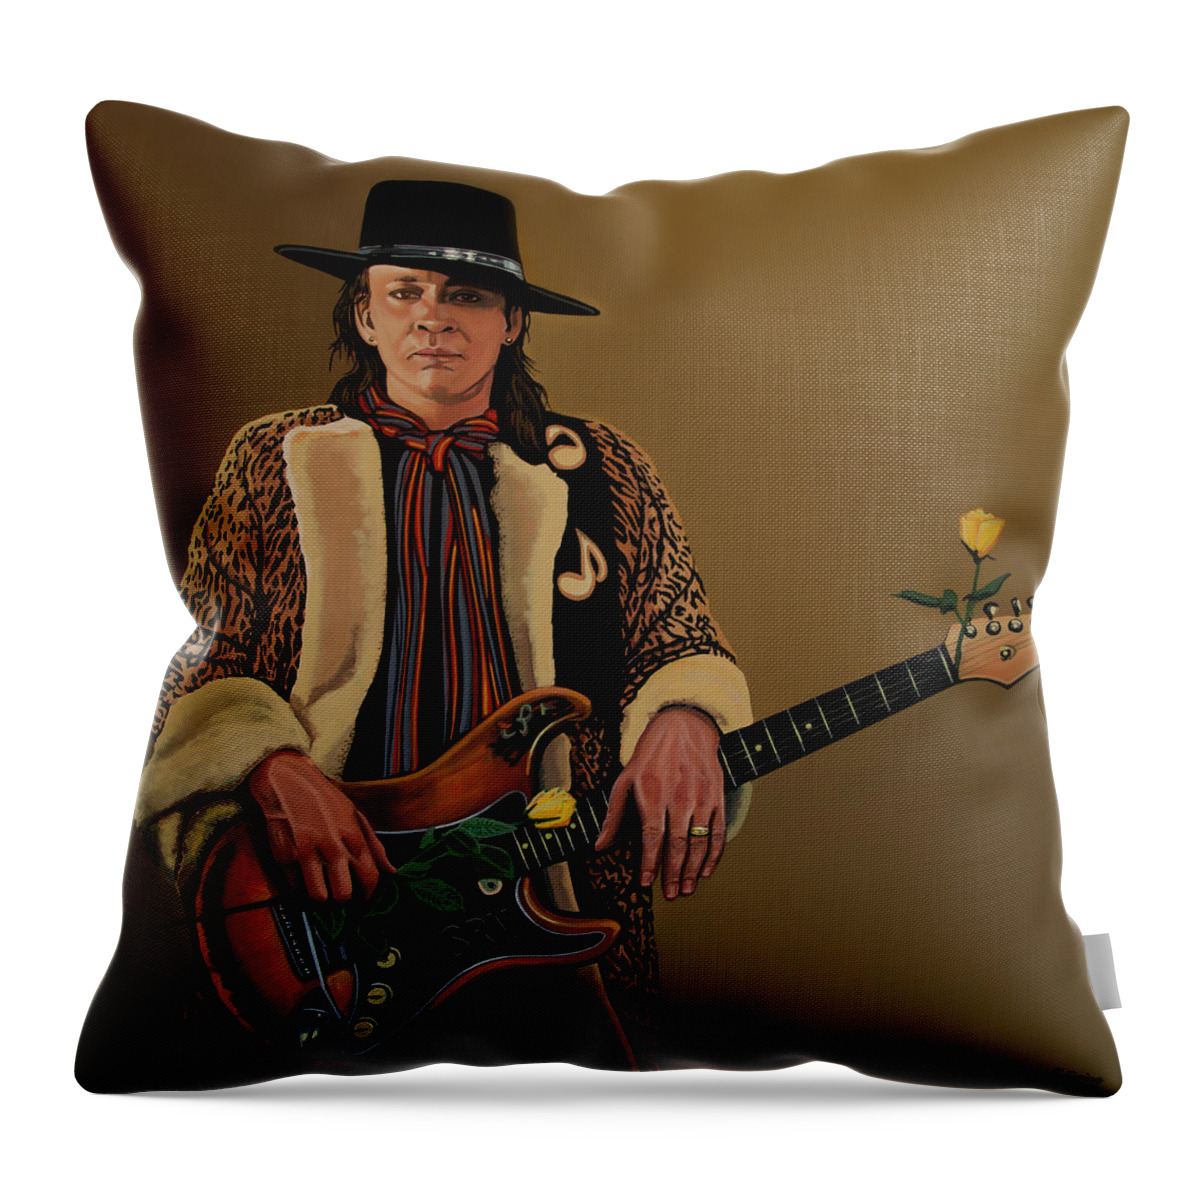 Stevie Ray Vaughan Throw Pillow featuring the painting Stevie Ray Vaughan 2 by Paul Meijering